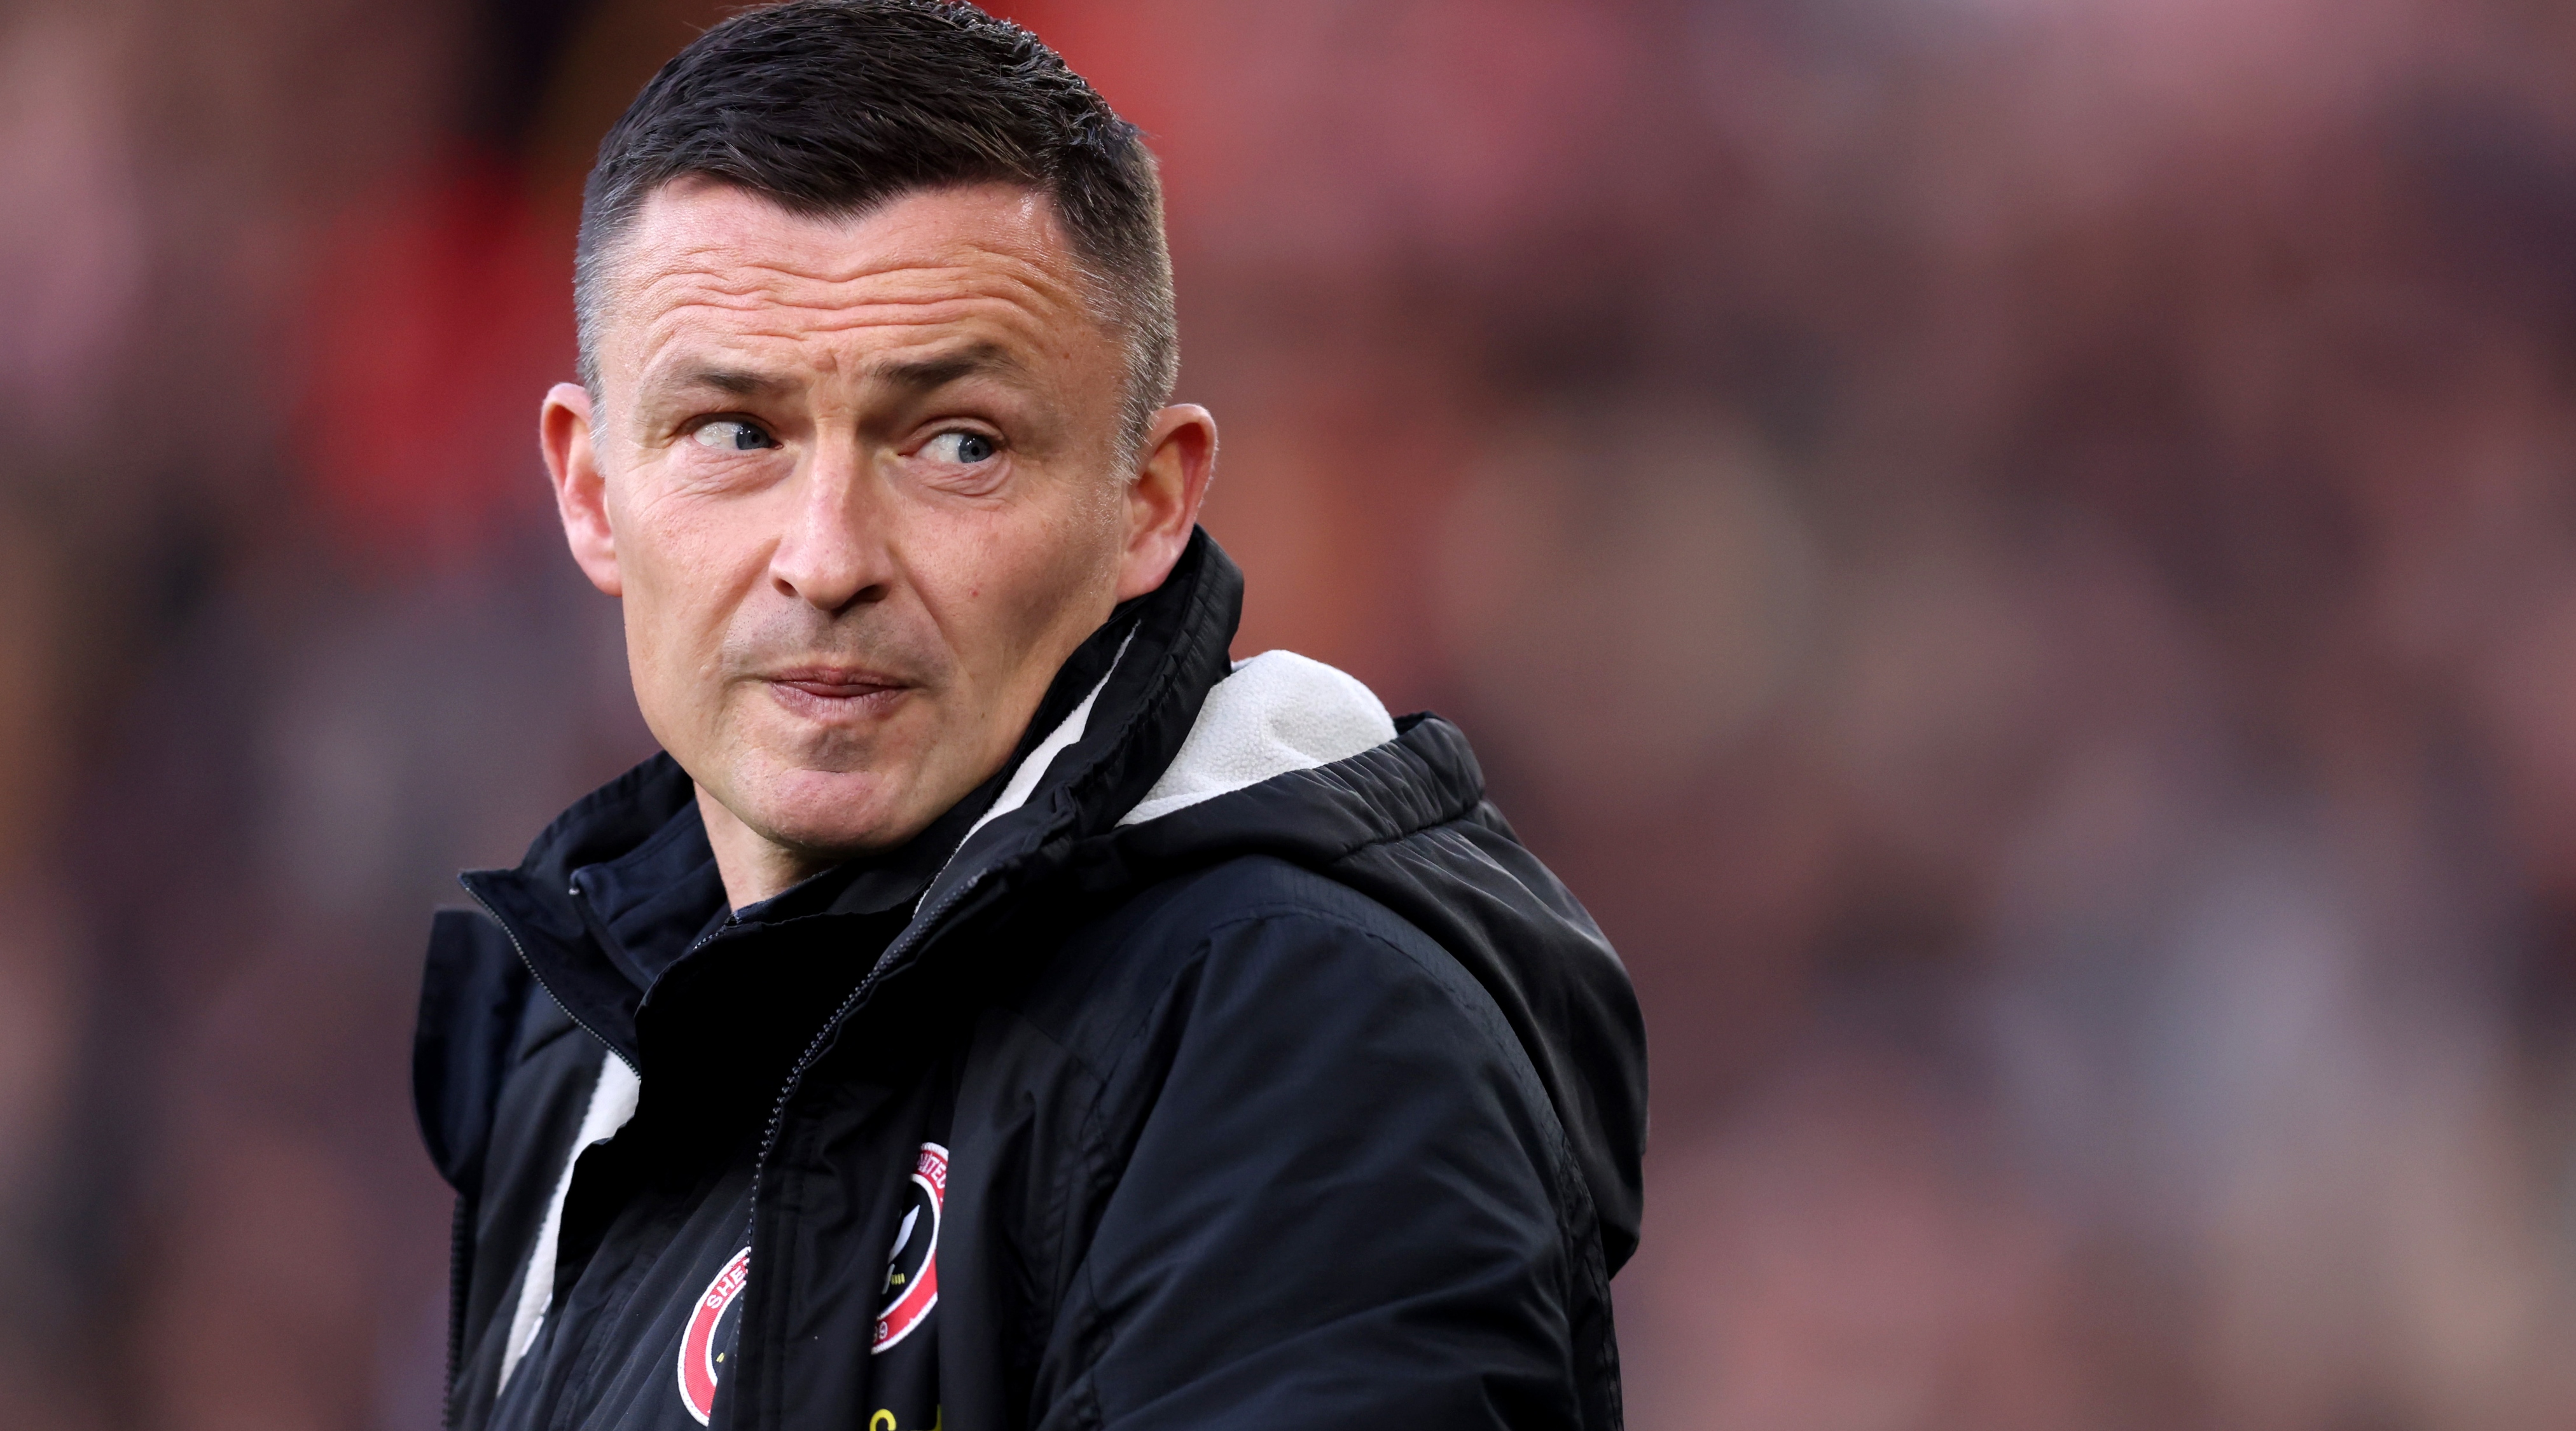 Sheffield United manager Paul Heckingbottom on the touchline during a match